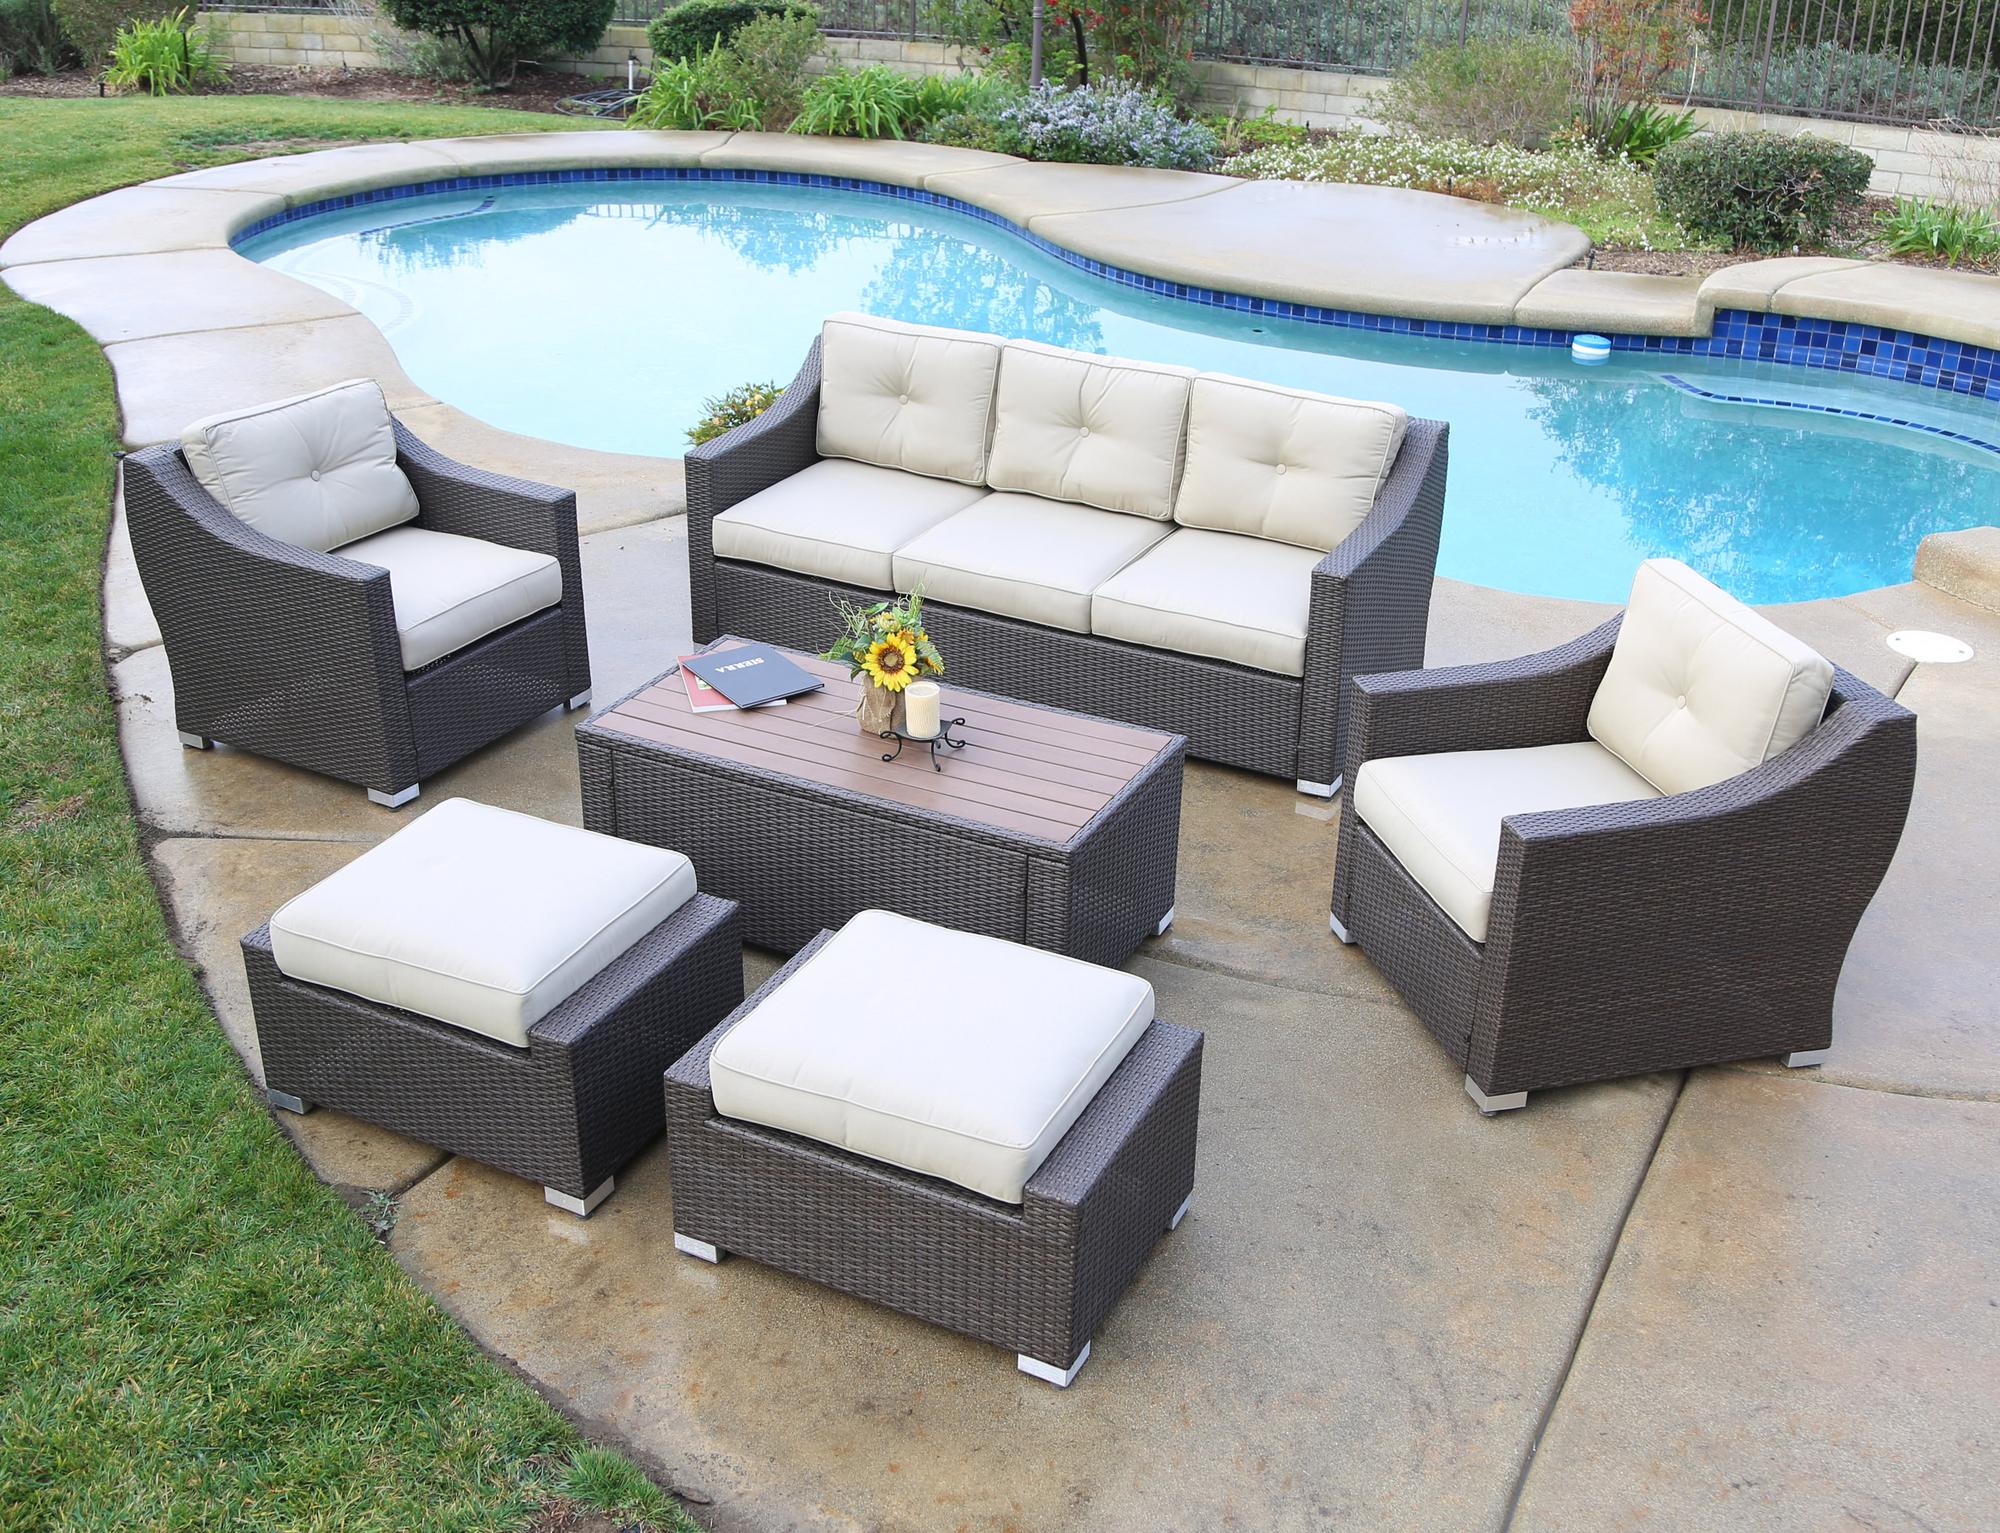 6 Piece South Beach Wicker Patio Deep Seating Group With Cushion